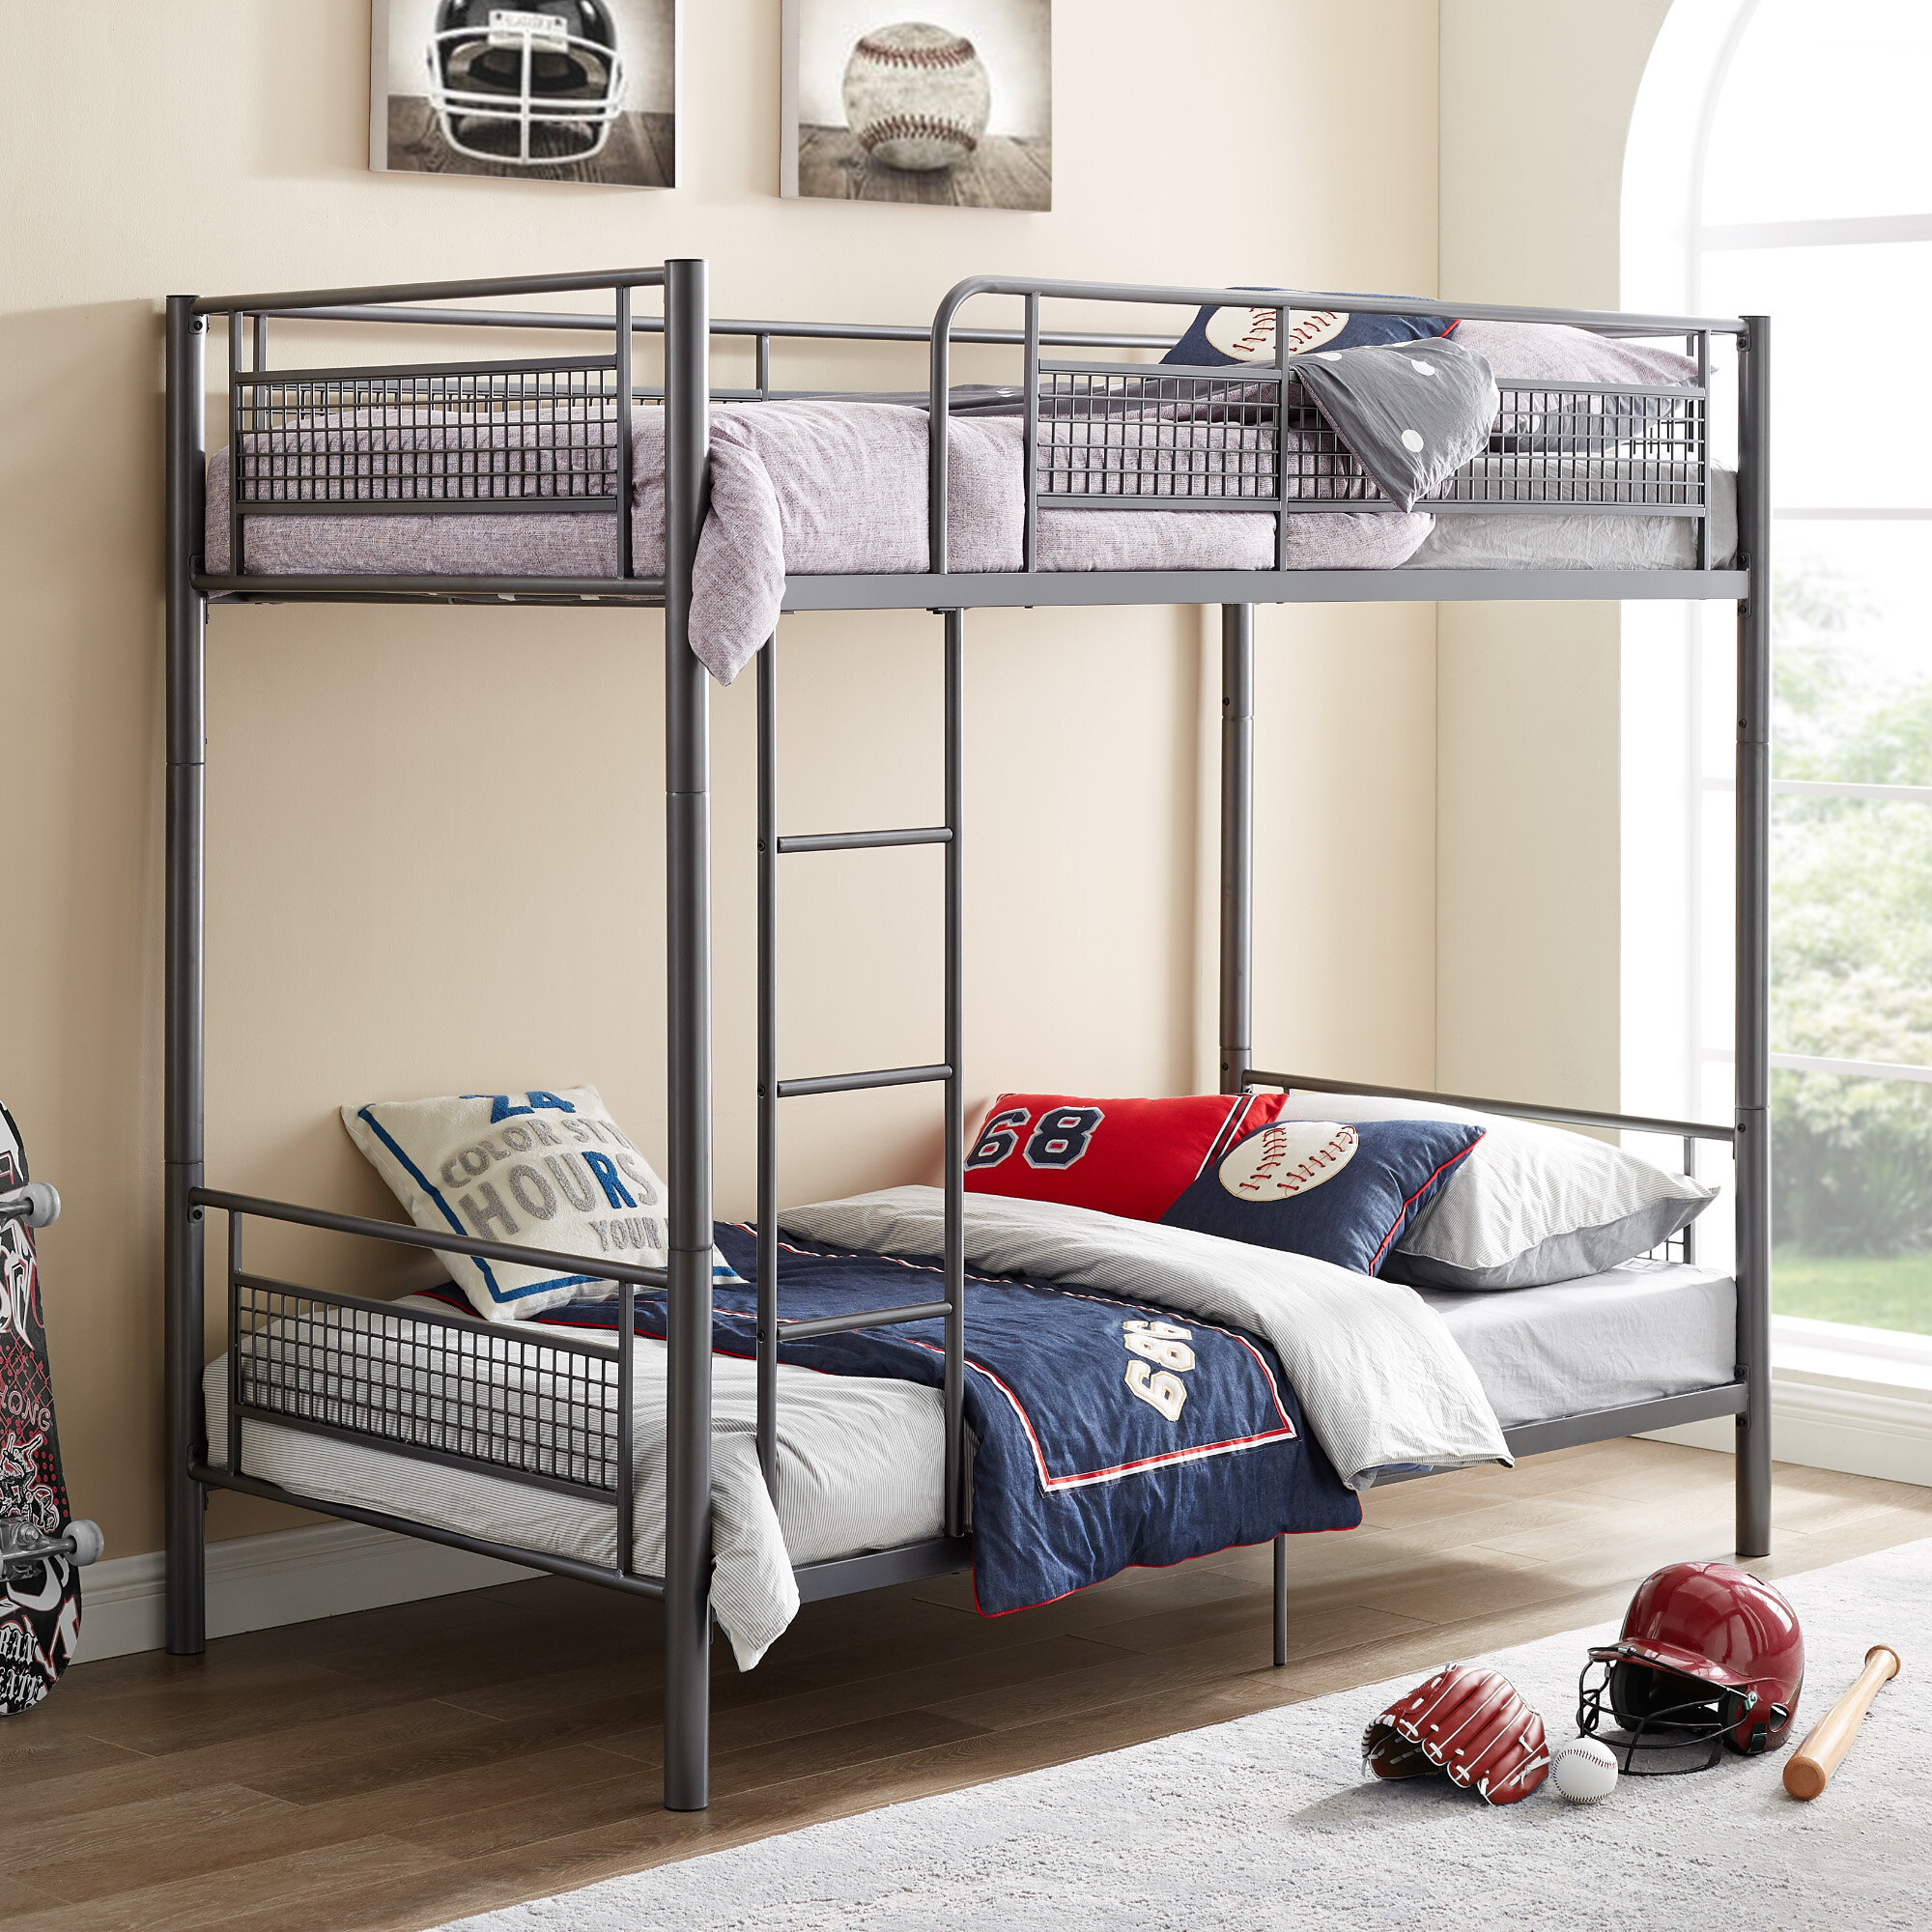 Isabelle & Max™ Jordin Twin Over Twin Bunk Bed & Reviews | Wayfair